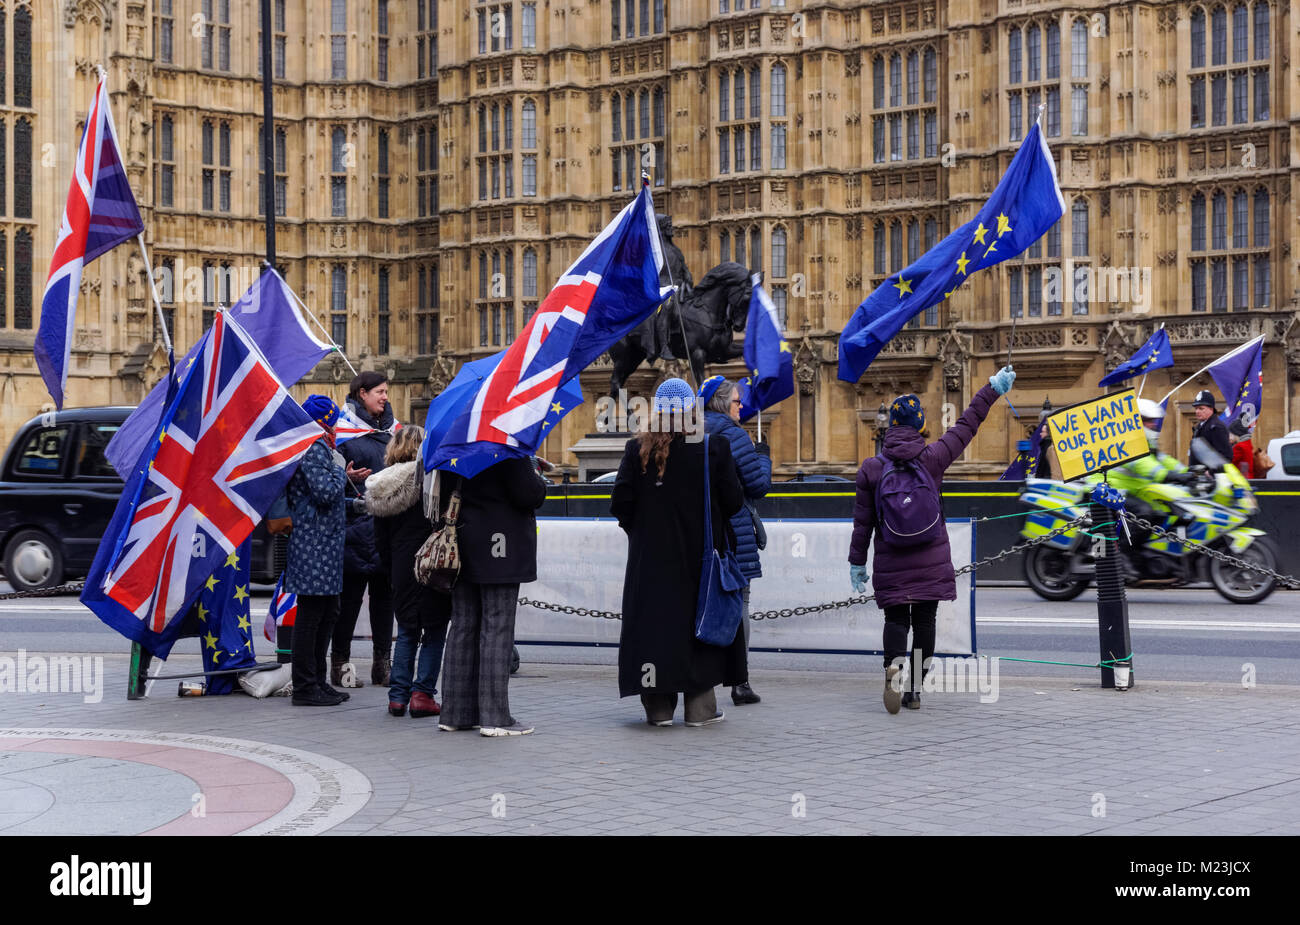 Anti-Brexit protesters demonstrate outside the Houses of Parliament in London, England, United Kingdom, UK Stock Photo